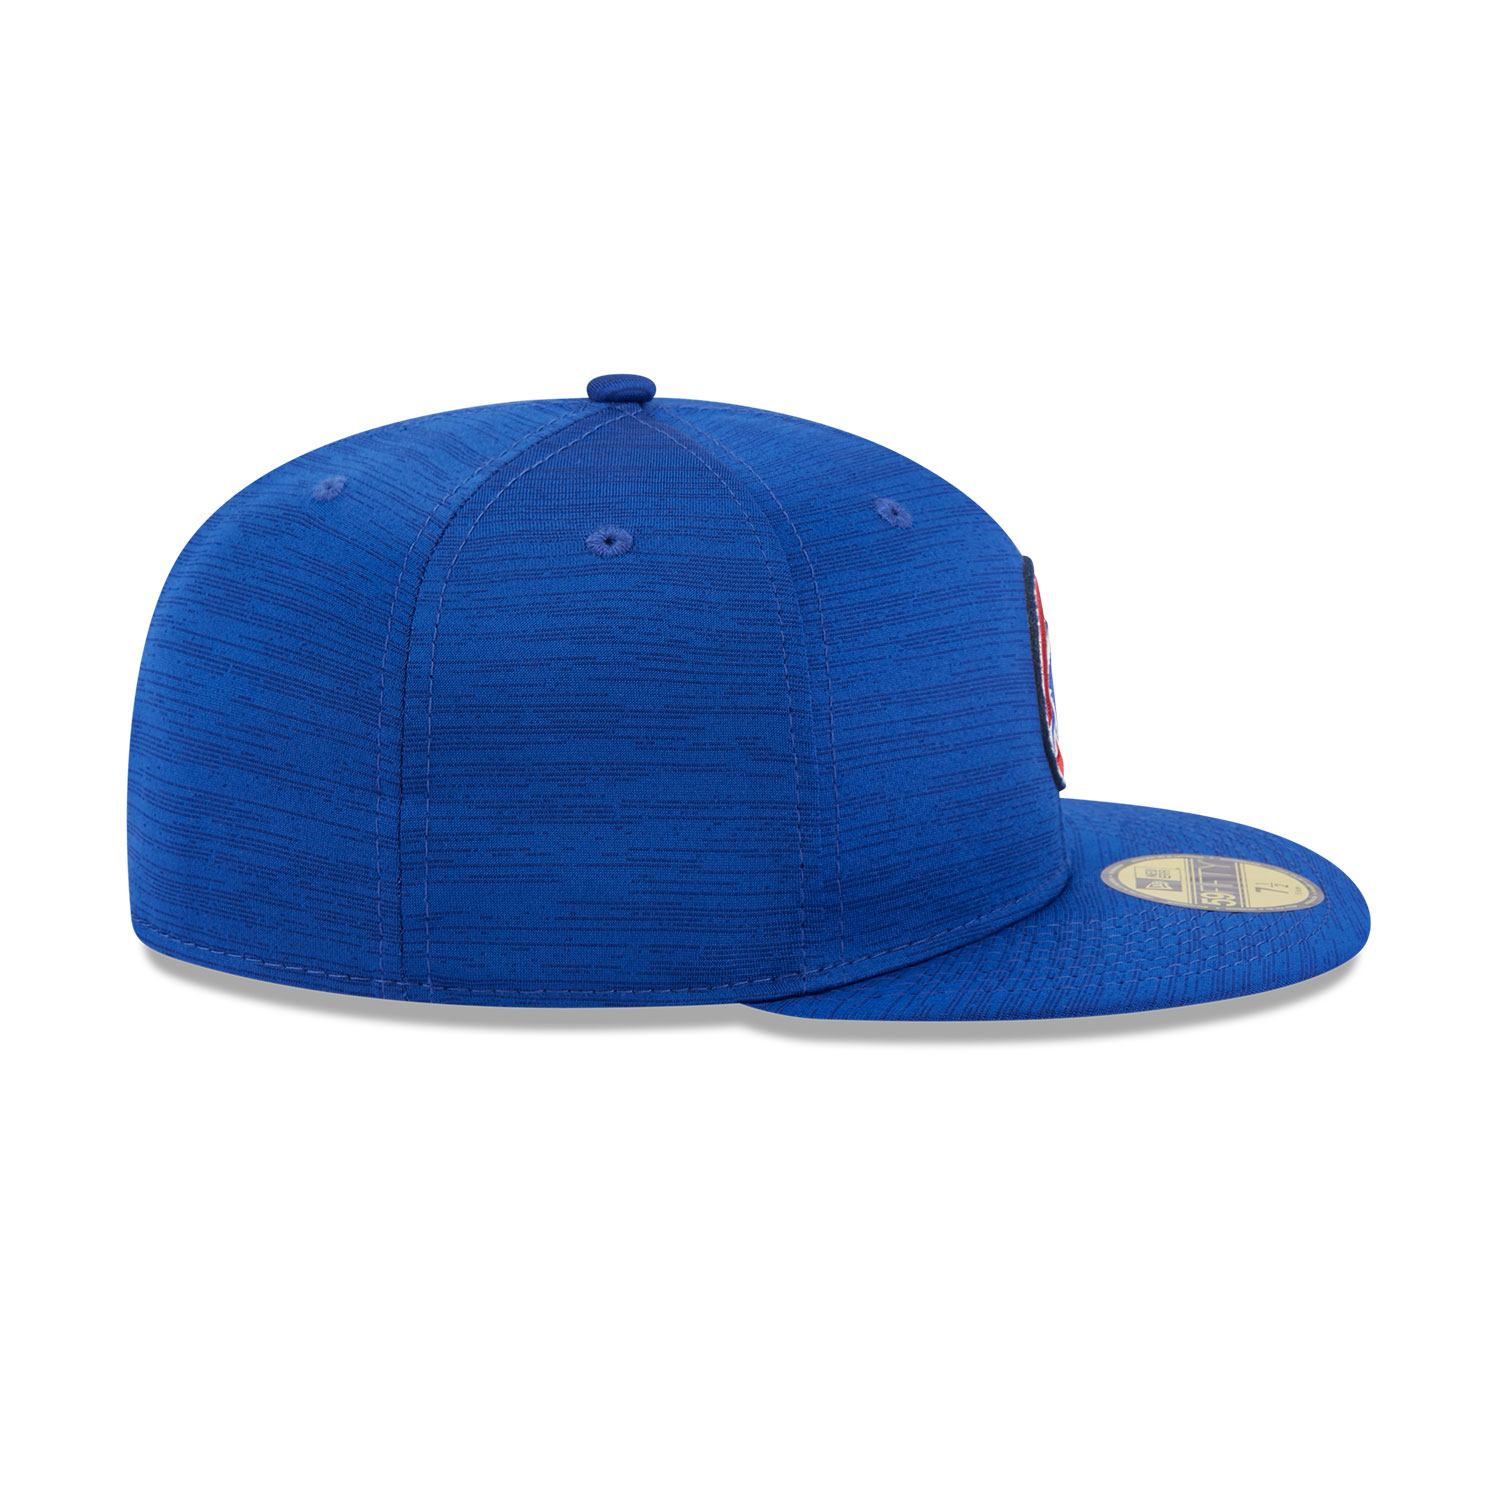 Chicago Cubs MLB Clubhouse Blue 59FIFTY Fitted Cap